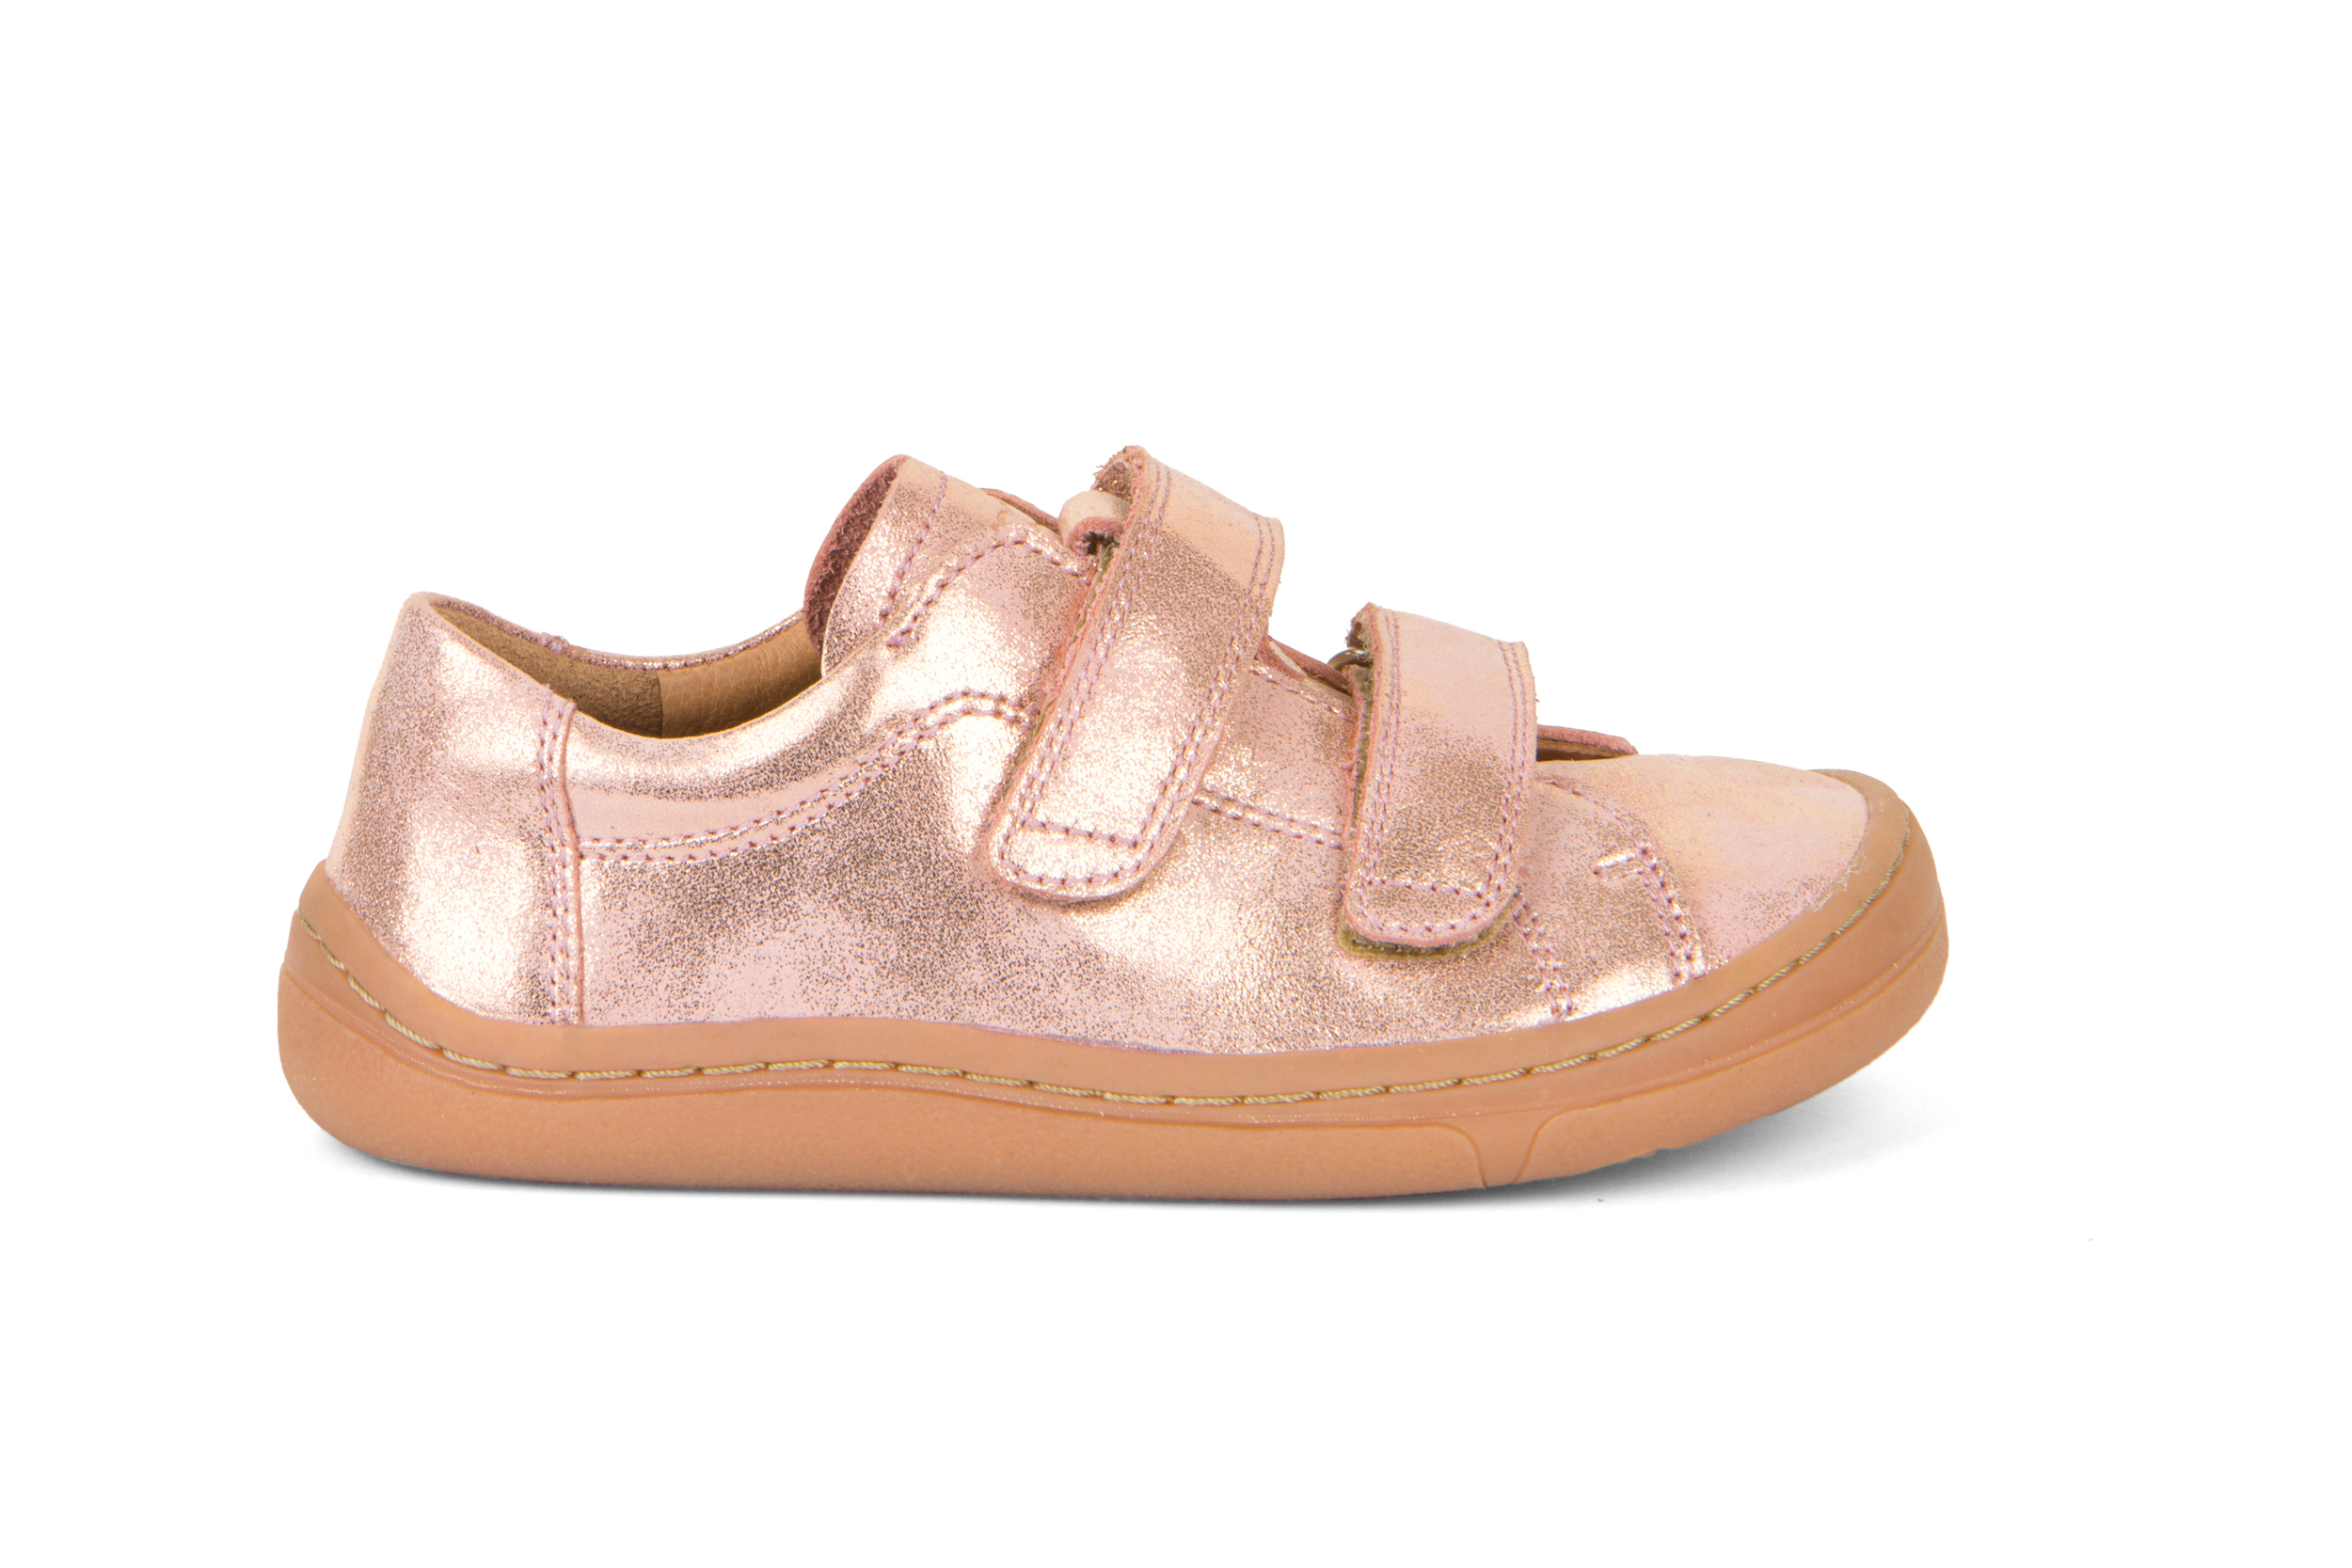 sneakers cuir froddo barefoot pink gold G3130225-11 sur la boutique liberty pieds-3